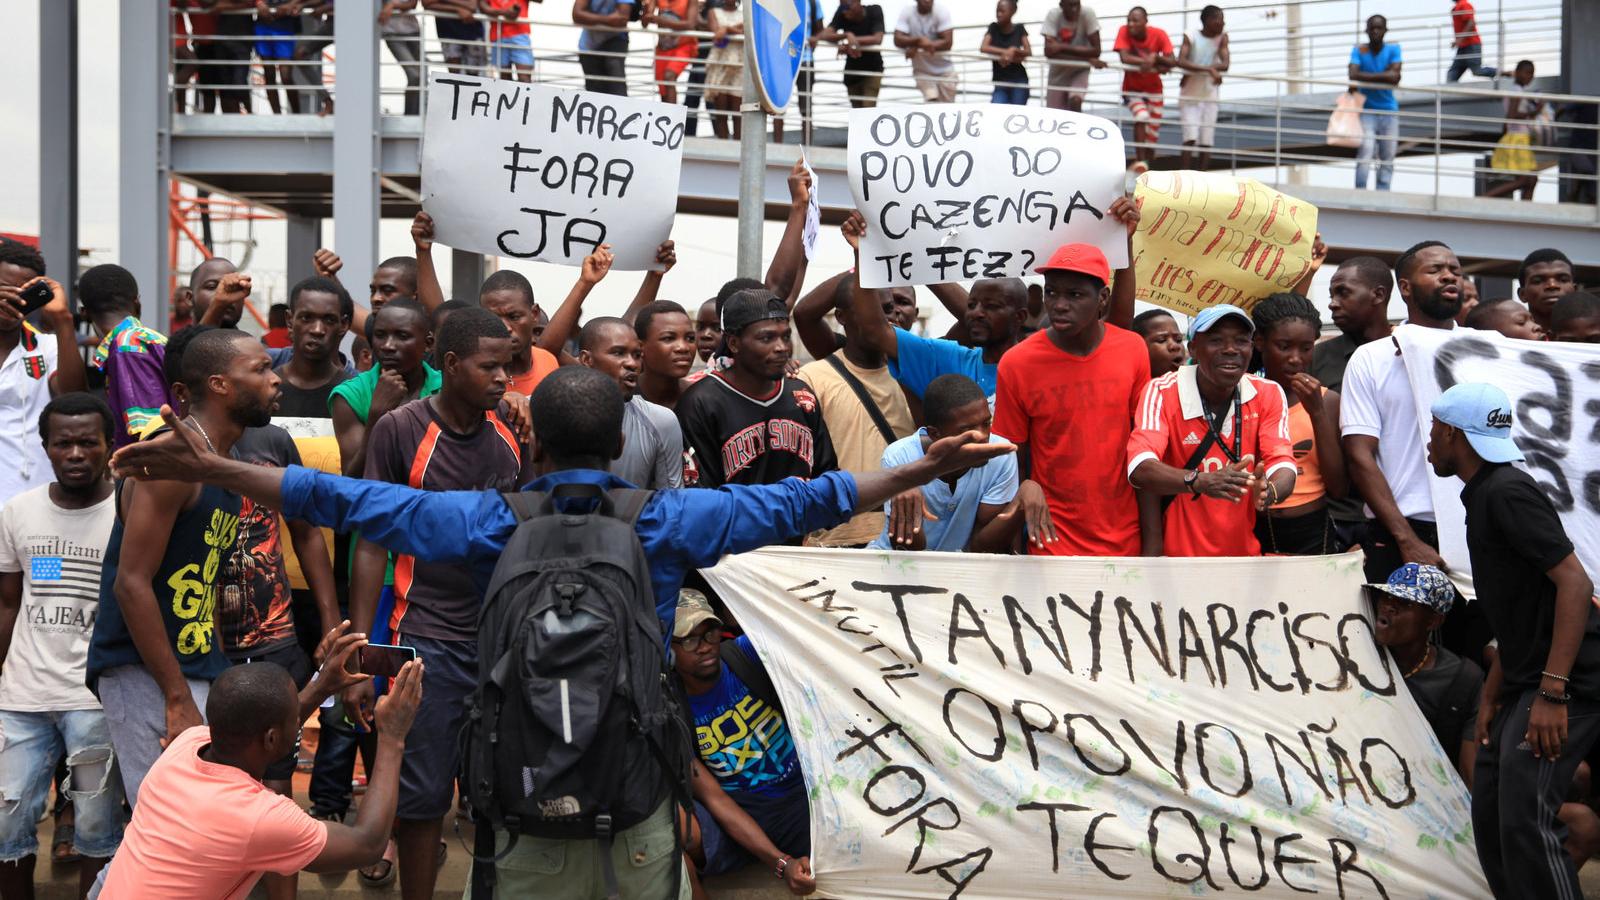 Protesters demonstrate against corruption in Luanda, Angola, April 7, 2018. 